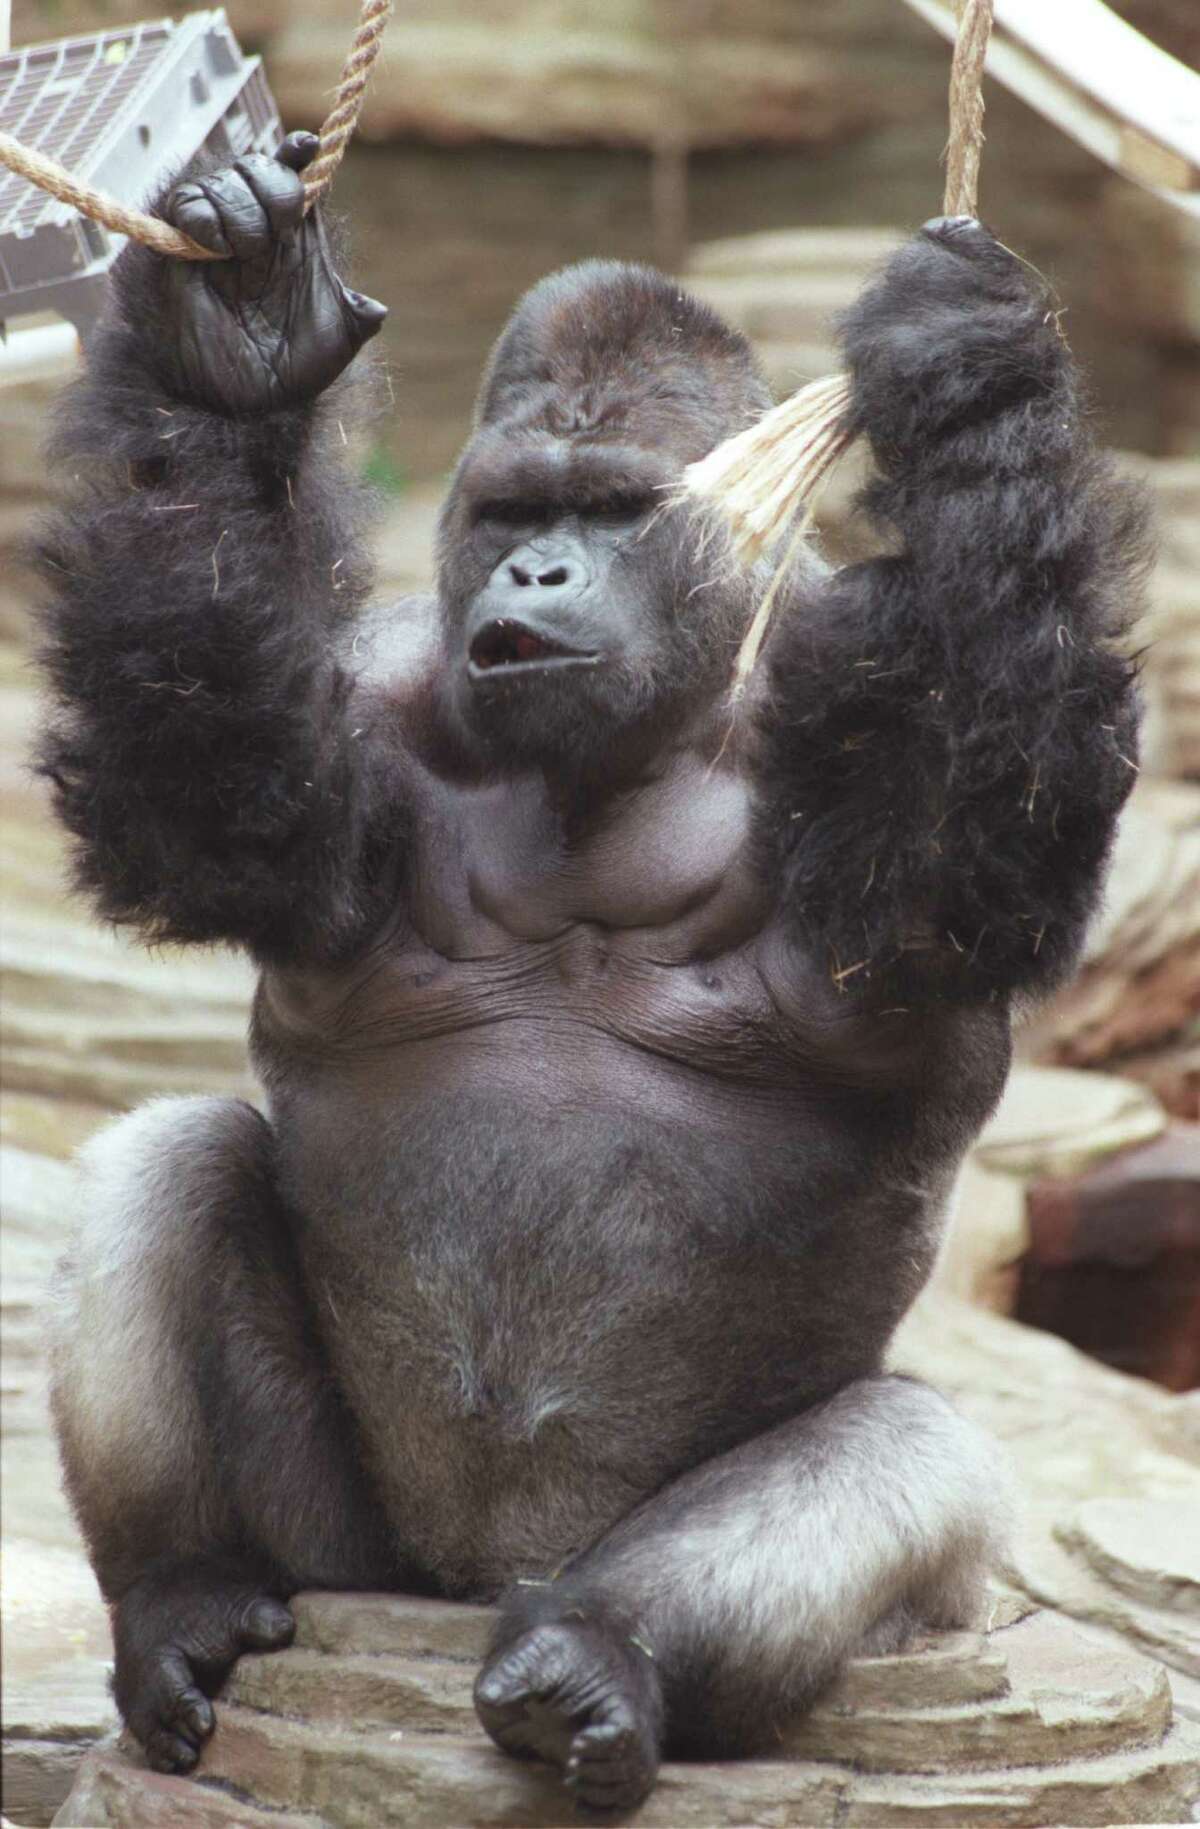 Houston favorite gorilla, M'Kubwa, was 43 when this photo was shot in 1996 at the Houston Zoo. He died in 2004 at age 51.